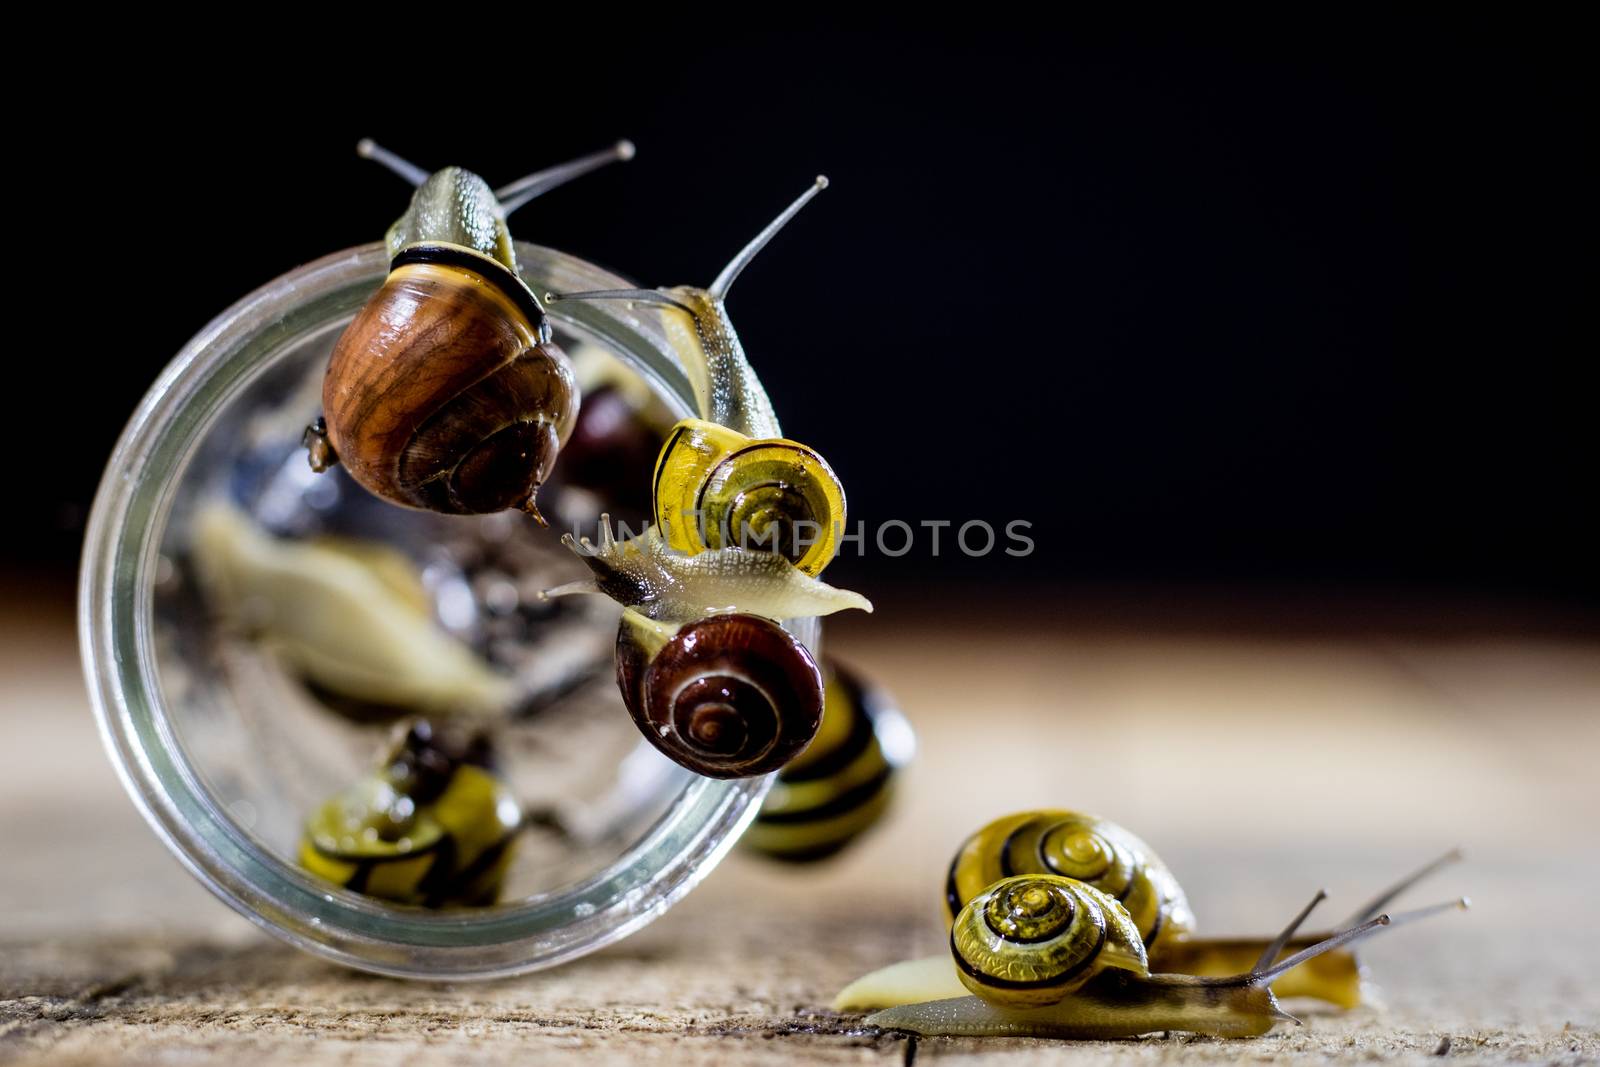 Colorful snails big and small in a glass jar. Wooden table, black background